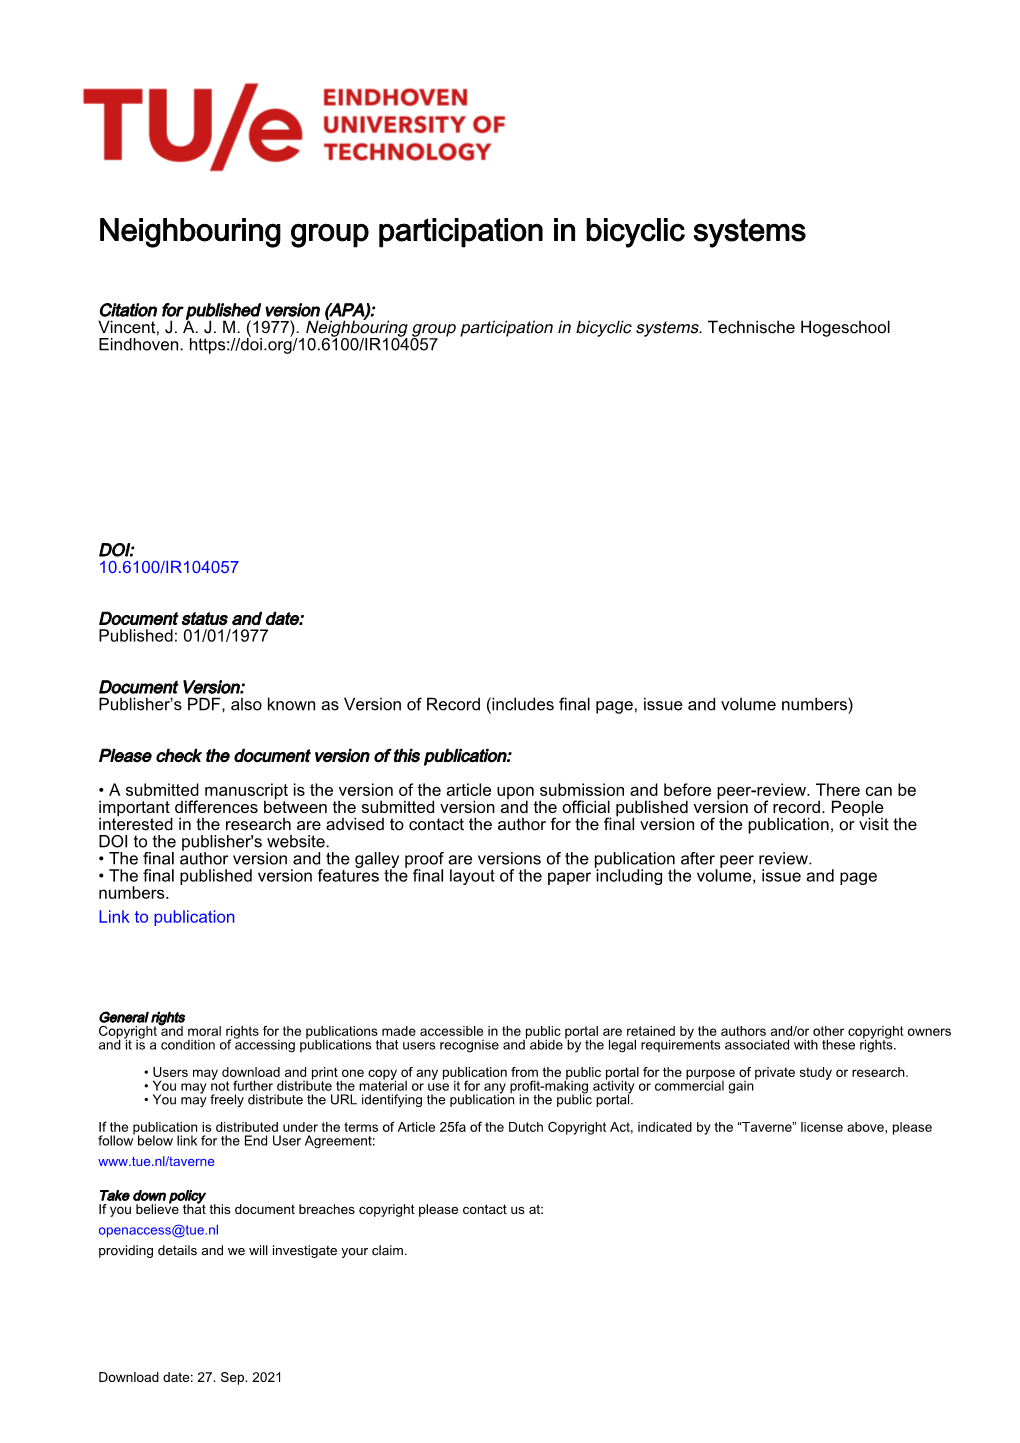 Neighbouring Group Participation in Bicyclic Systems